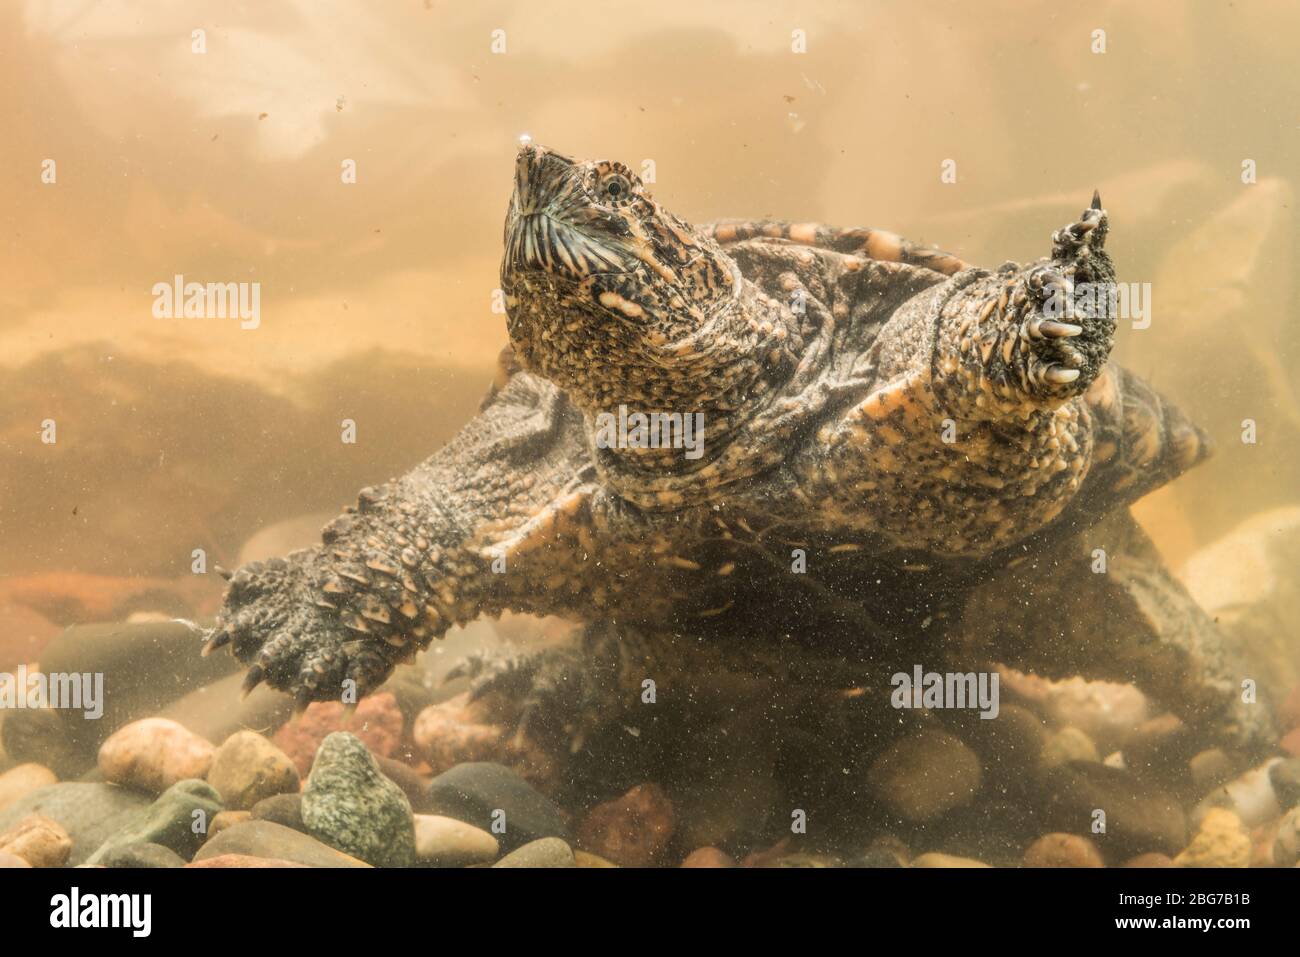 Common Snapping Turtle, (Chelydra serpentina), swimming under water, Eastern North America, by Dominique Braud/Dembinsky Photo Assoc Stock Photo